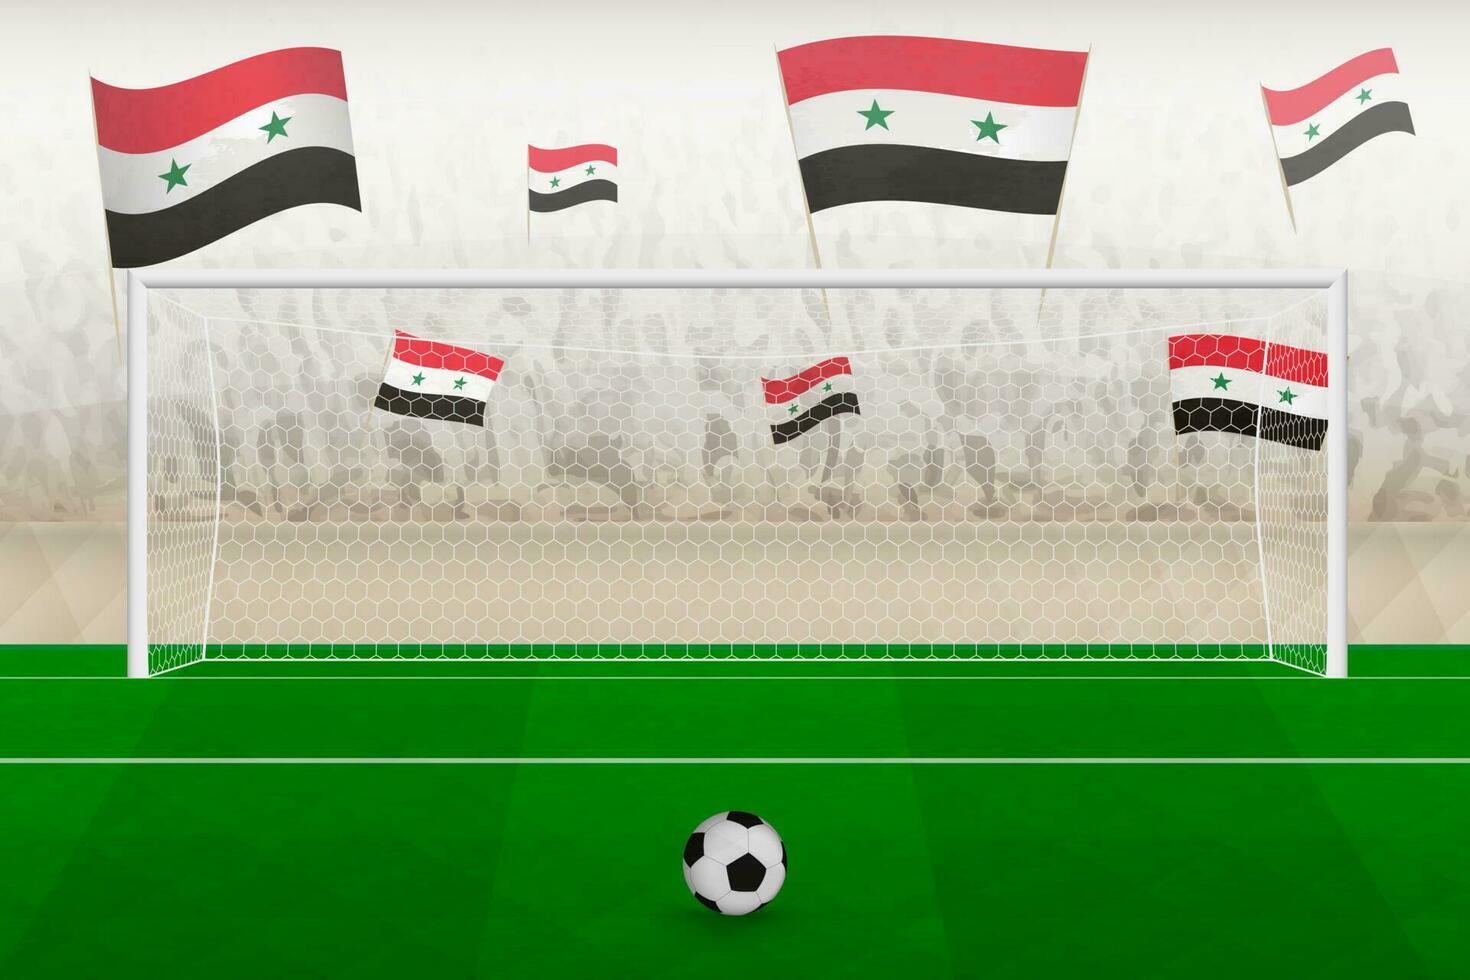 Syria football team fans with flags of Syria cheering on stadium, penalty kick concept in a soccer match. vector